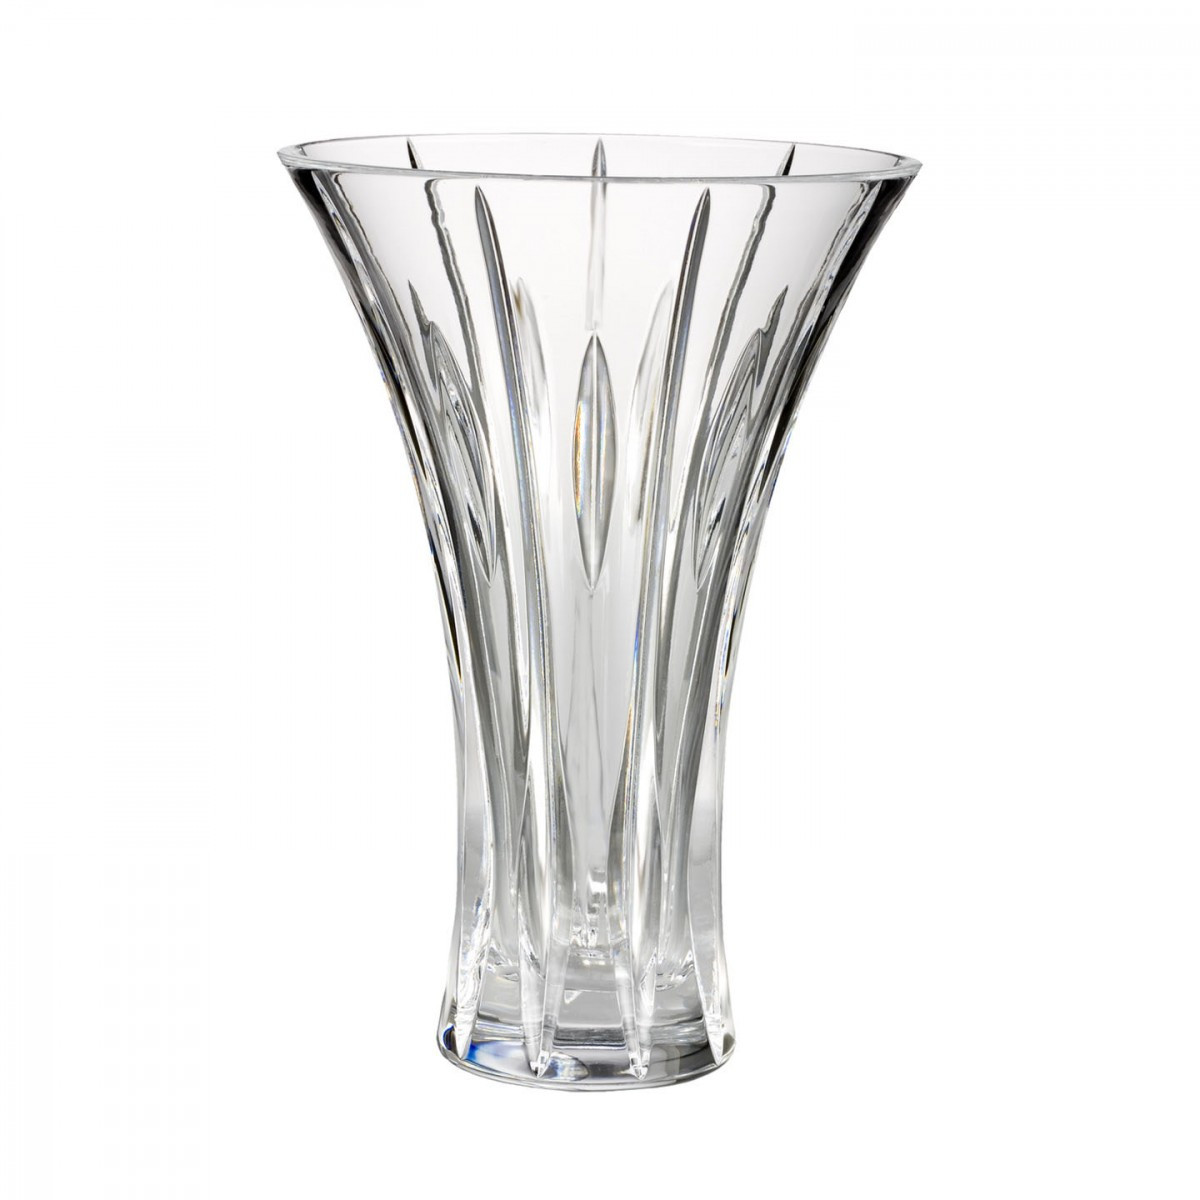 28 Fantastic Large Waterford Vase 2024 free download large waterford vase of waterford crystal vase patterns www topsimages com pertaining to sheridan in flared vase marquis waterford jpg 1200x1200 waterford crystal vase patterns